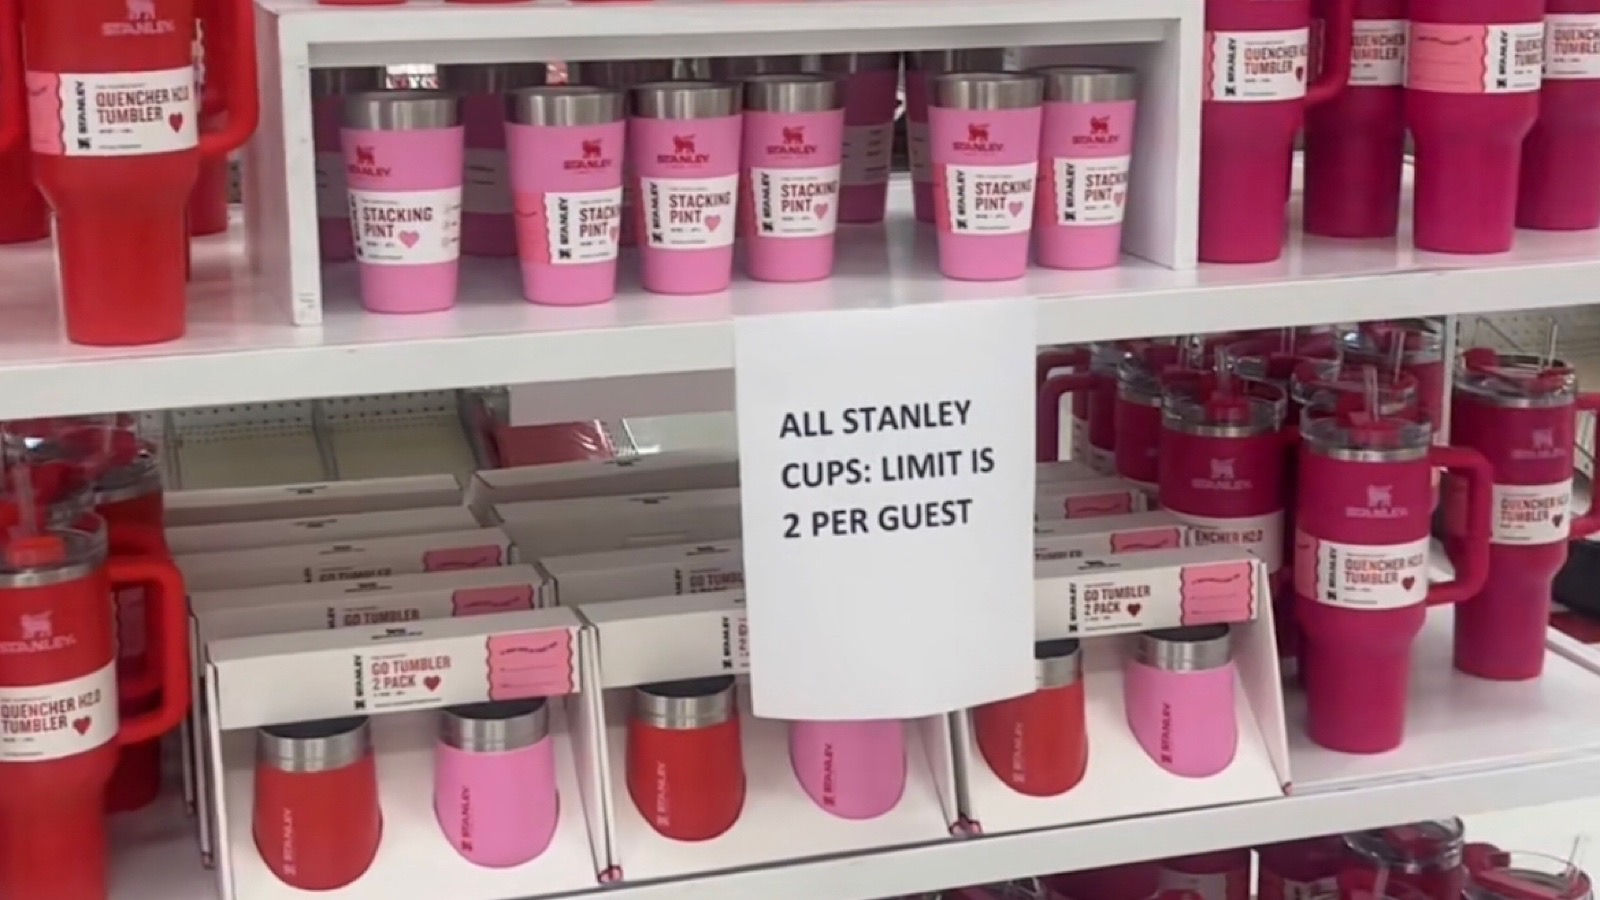 Aggressive Starbucks customer demands pink Stanley cup from workers